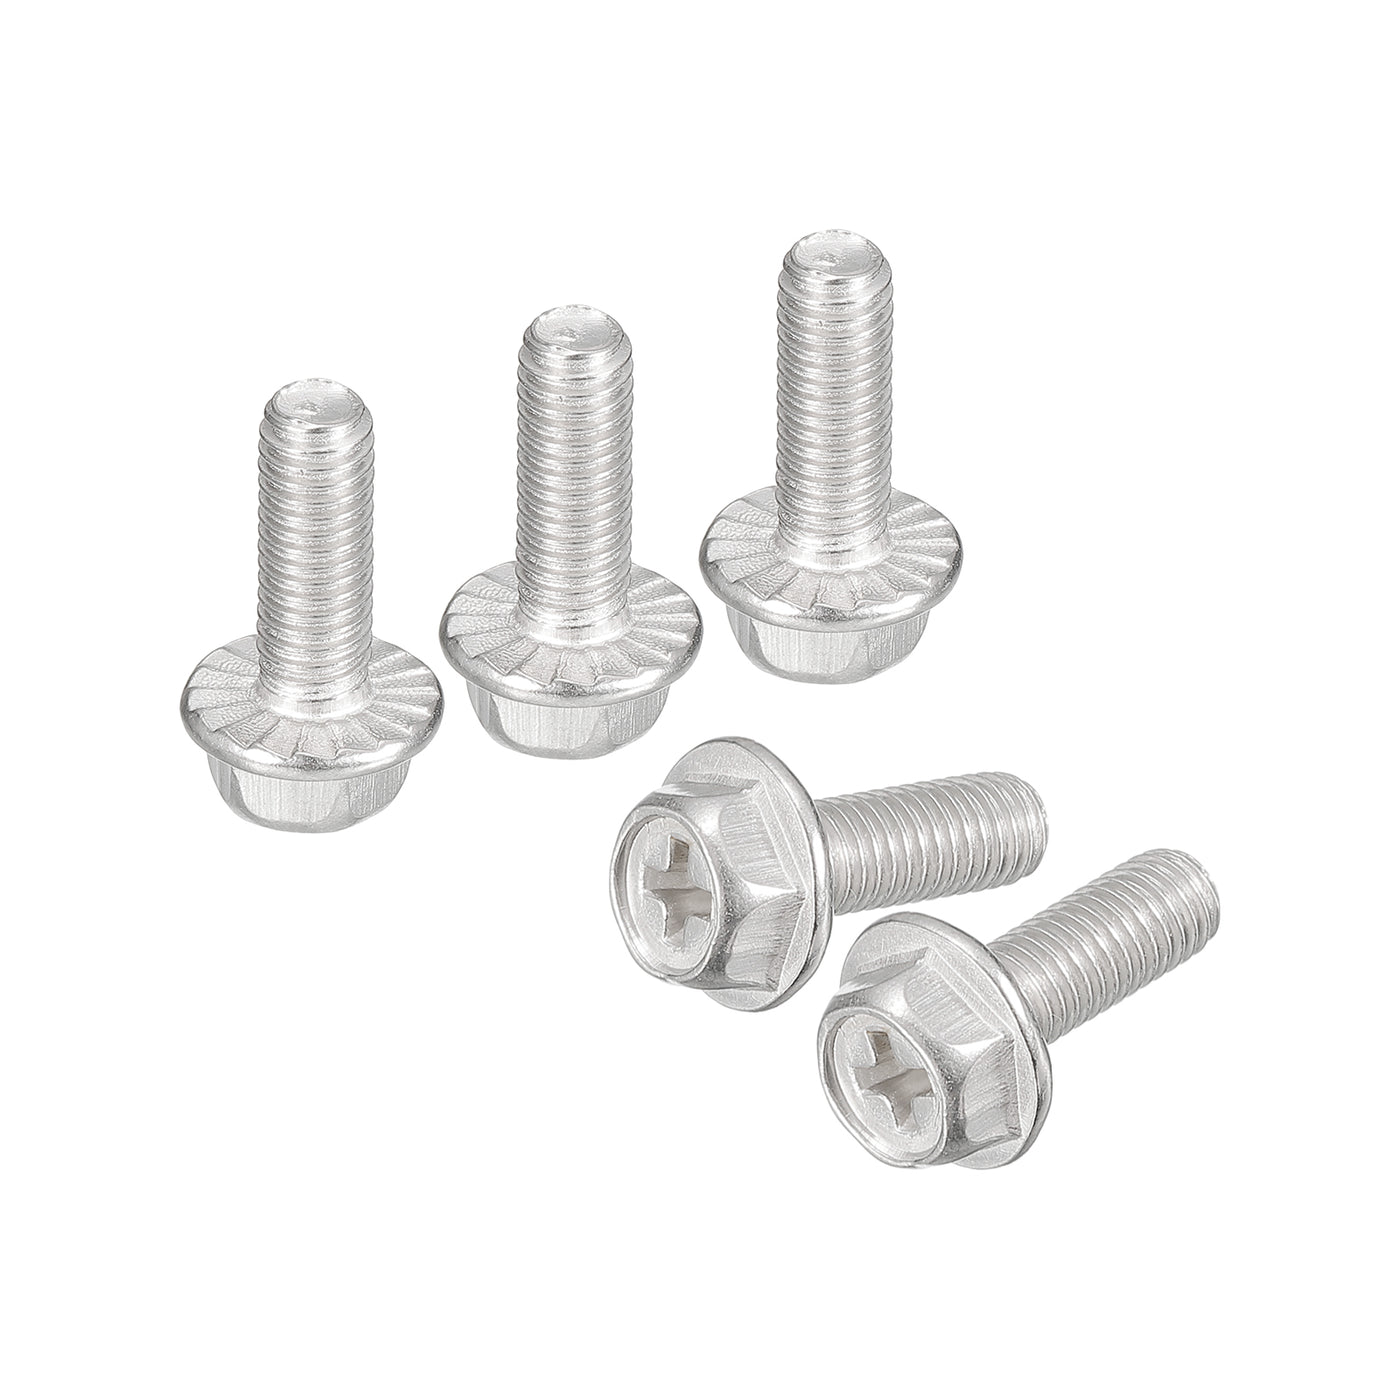 uxcell Uxcell M5x14mm Phillips Hex Head Flange Bolts, 25pcs 304 Stainless Steel Screws